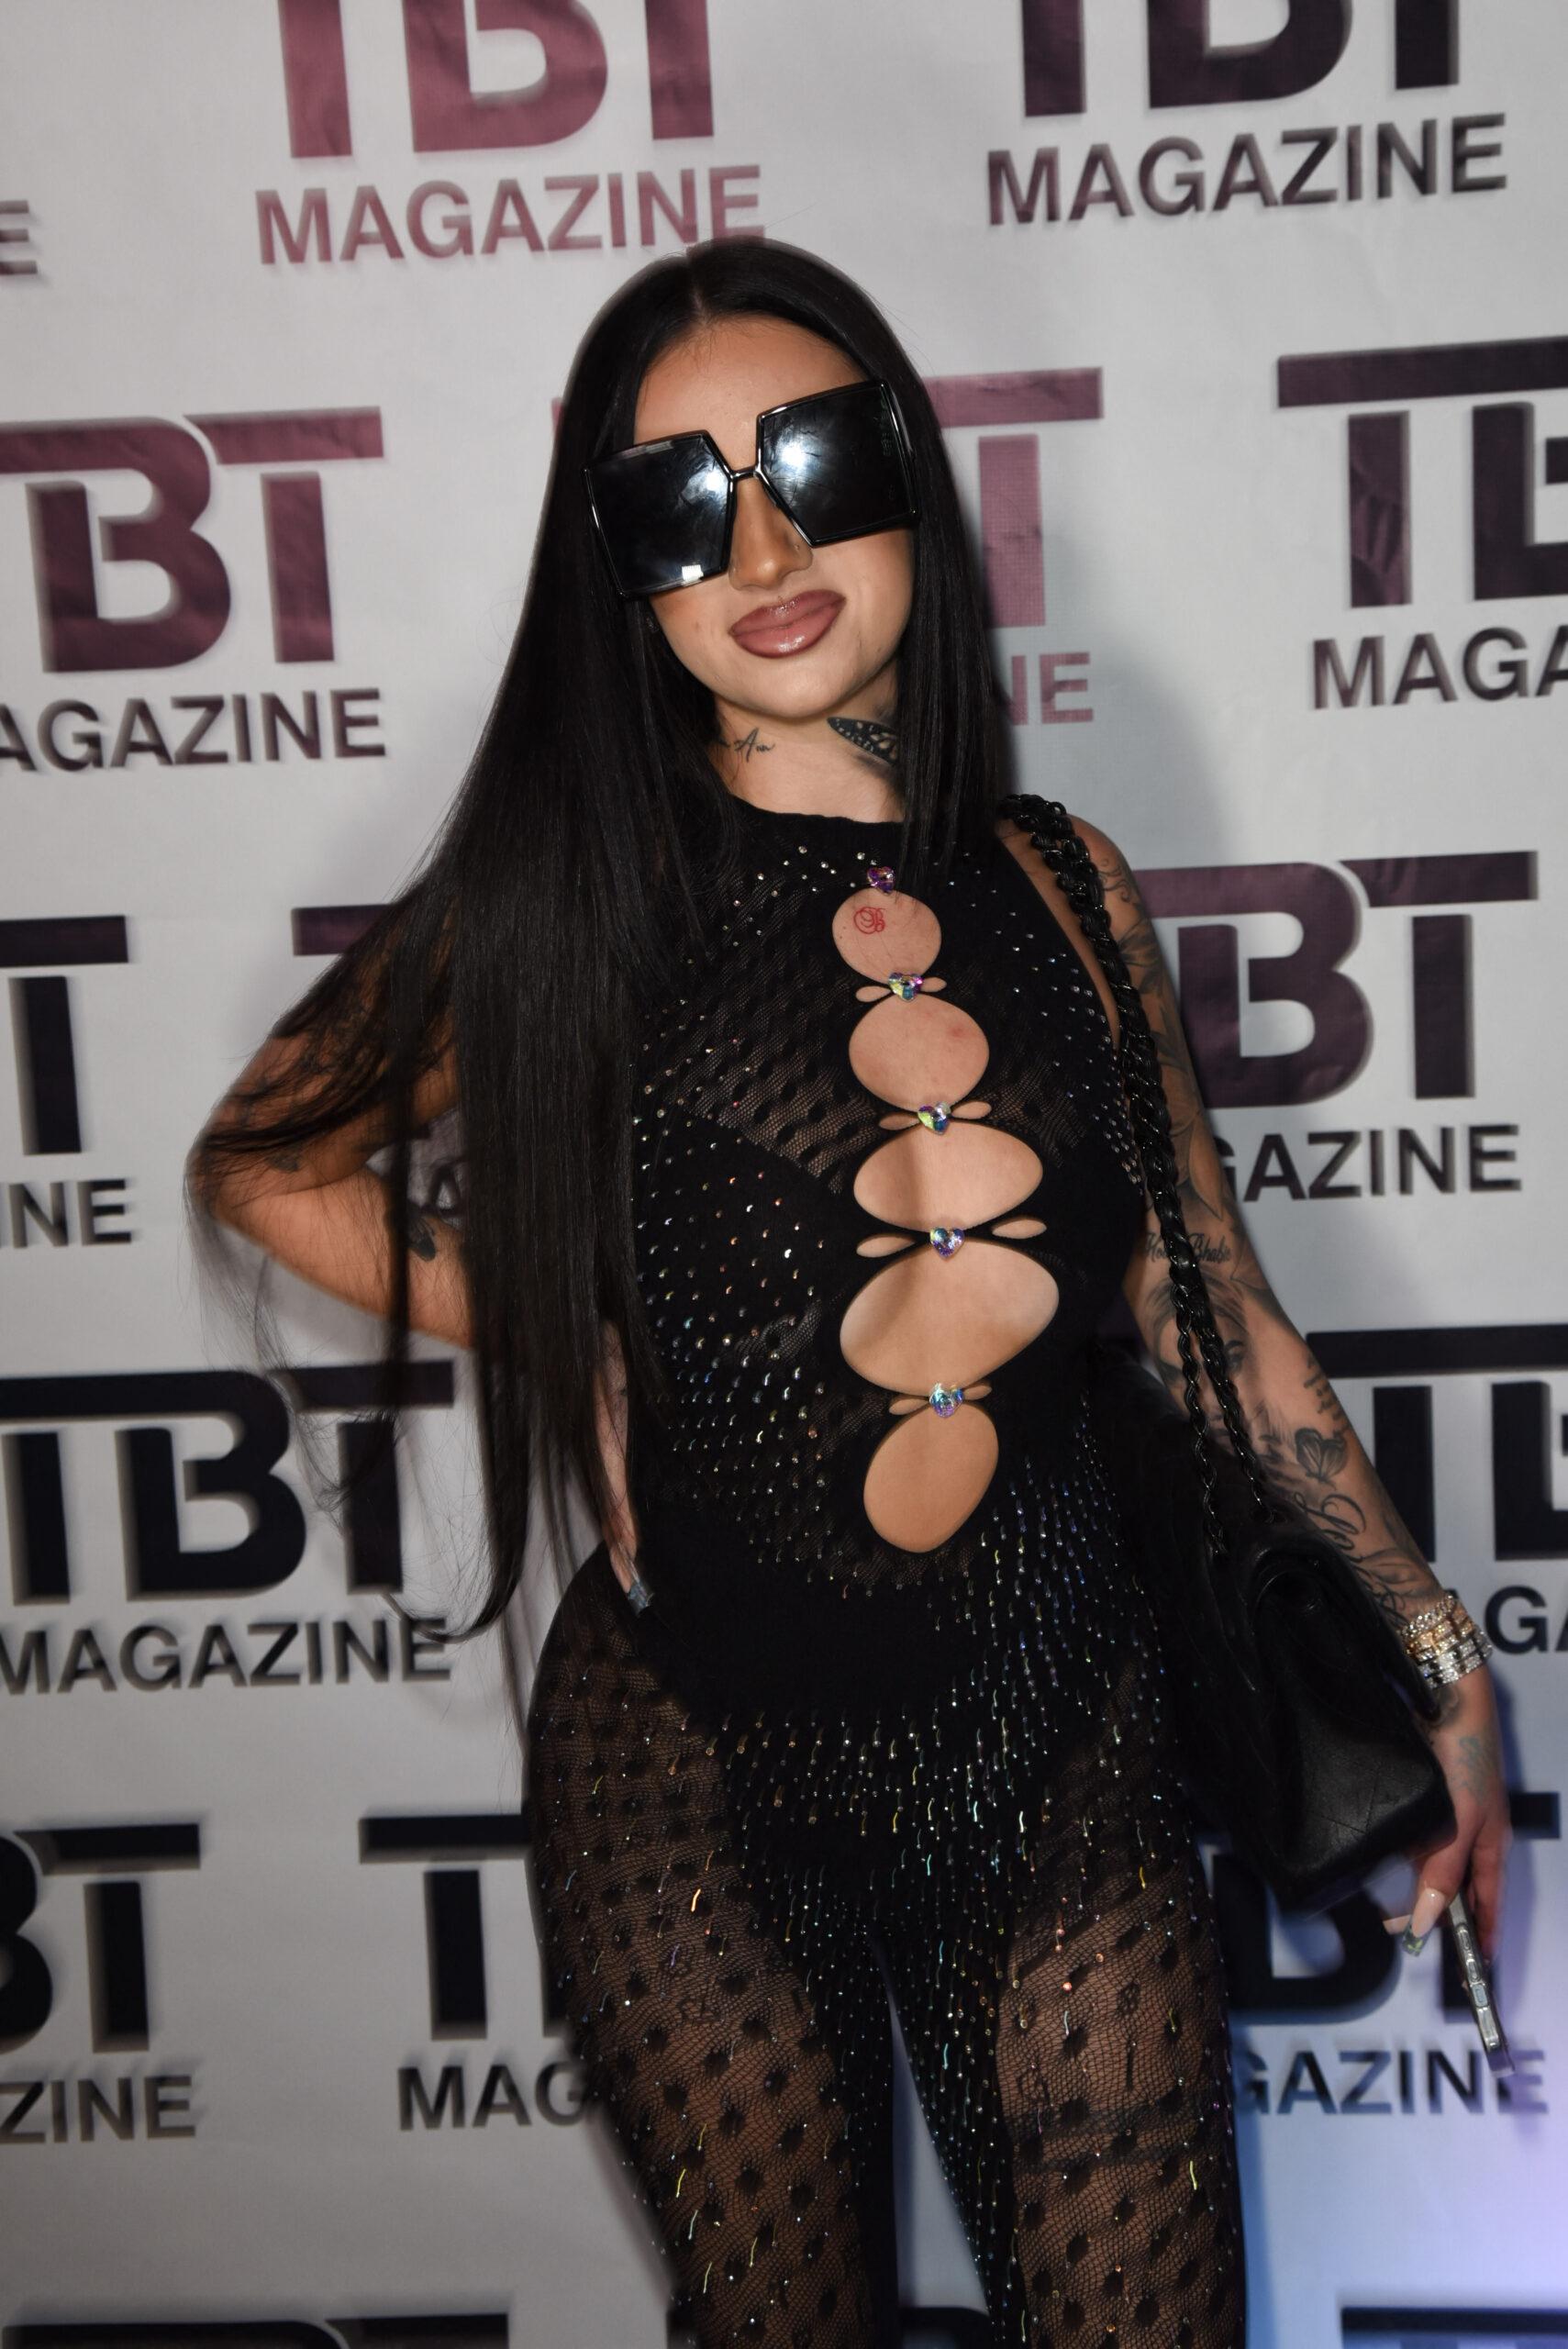 Bhad Bhabie at TBT Magazine Glow Party - Fort Lauderdale, Florida USA - 26 August